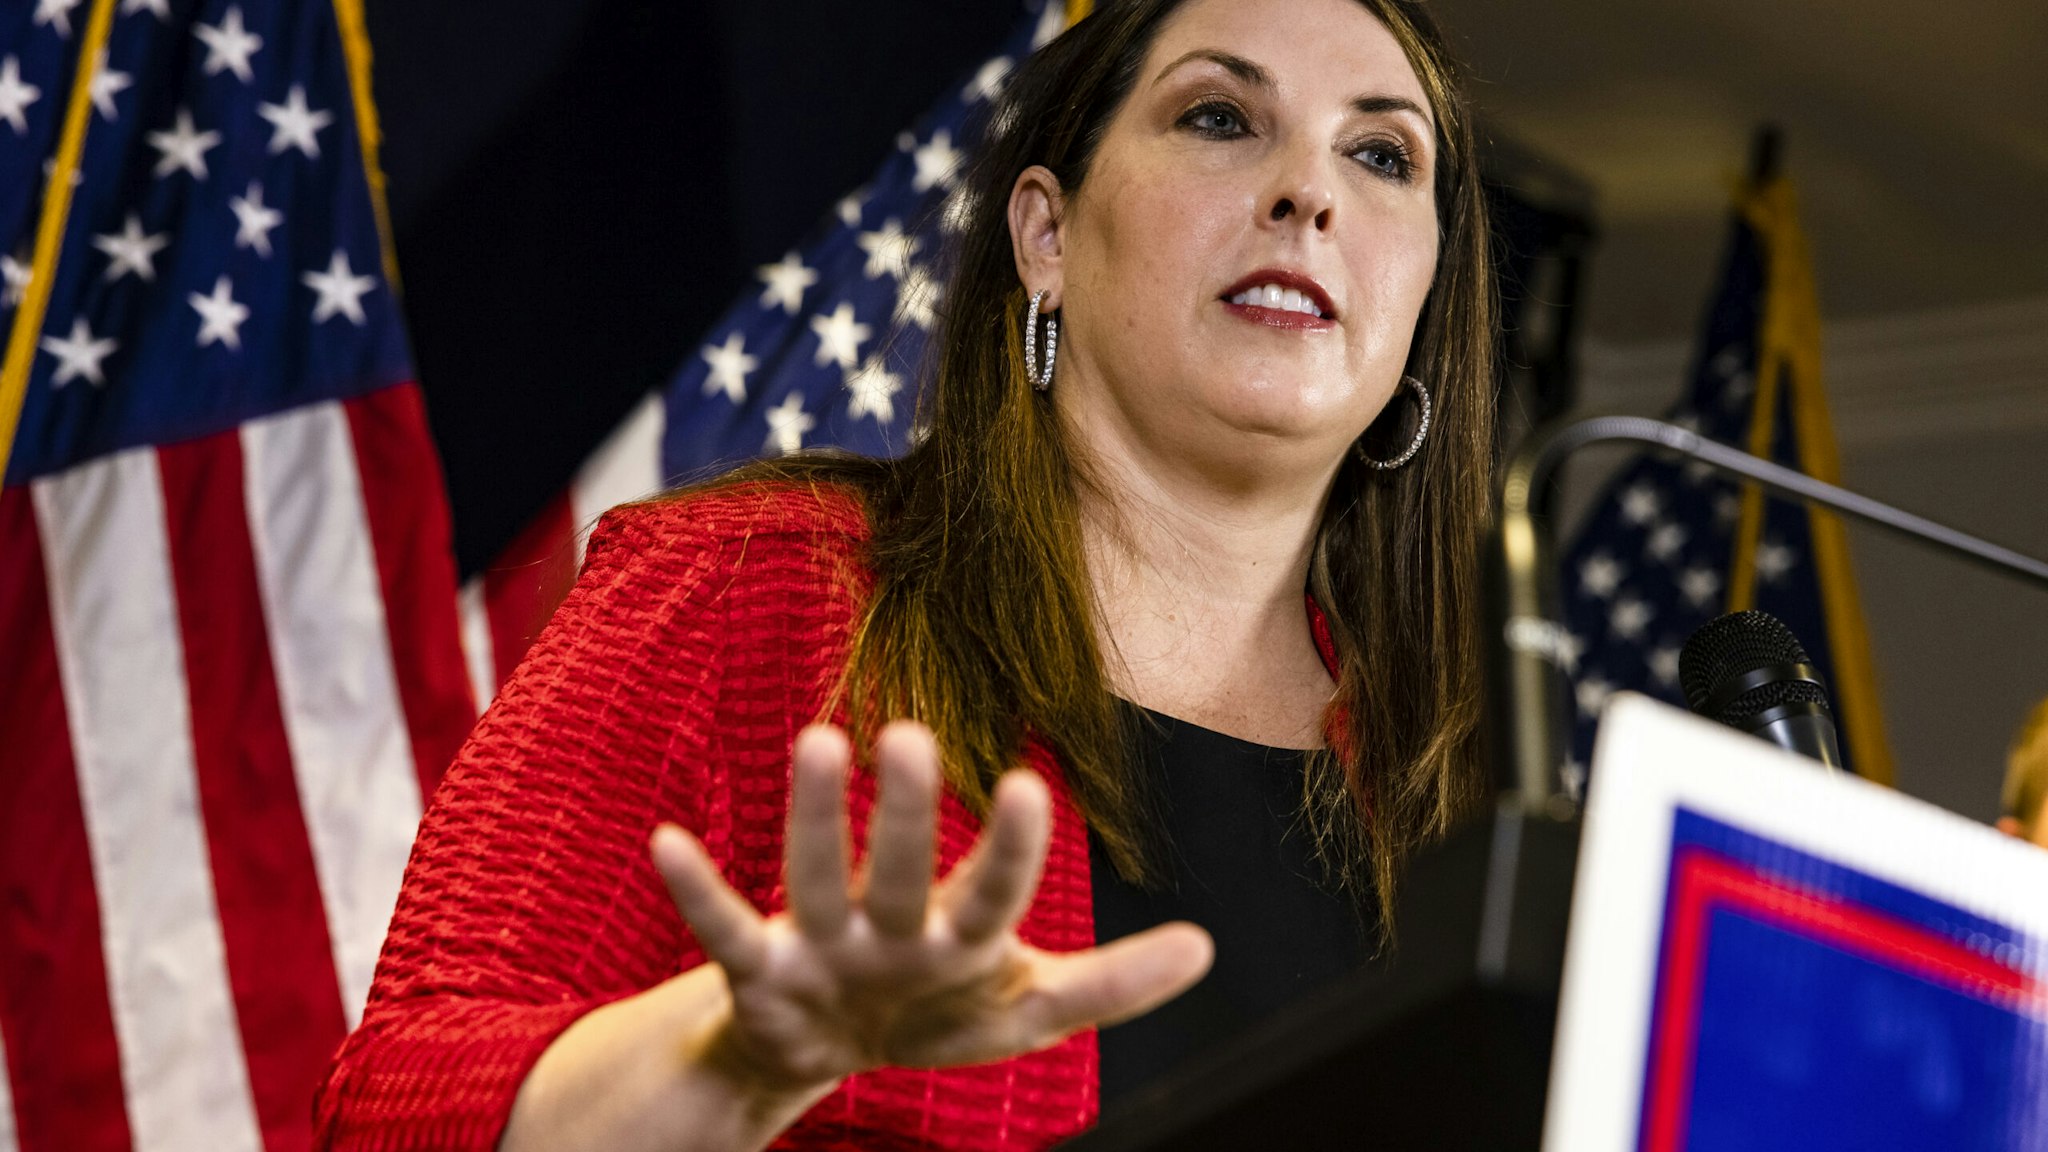 RNC Chairwoman Ronna McDaniel speaks during a press conference at the Republican National Committee headquarters on November 9, 2020 in Washington, DC.